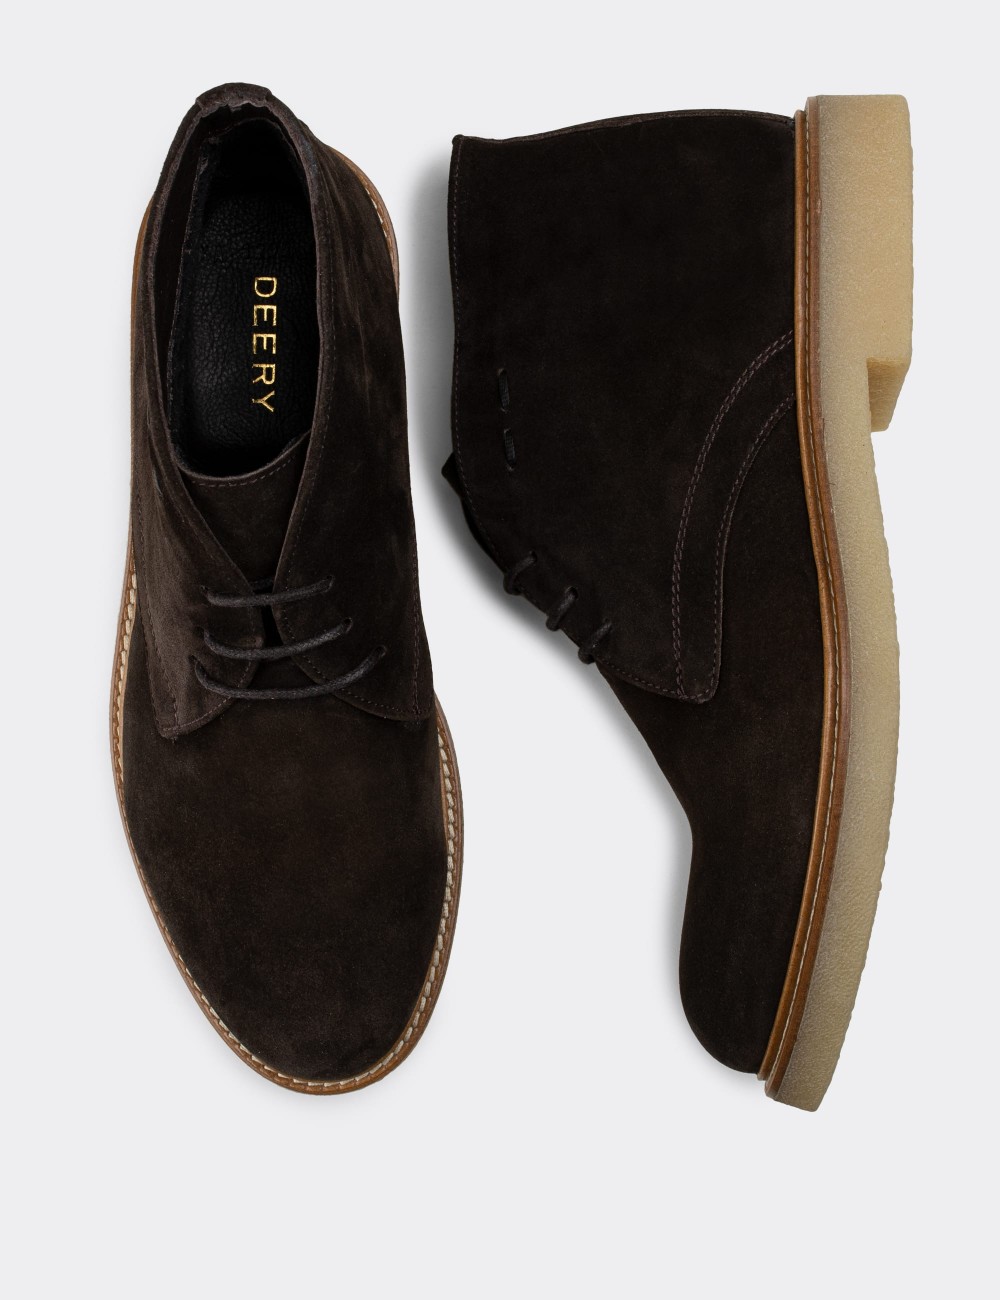 Brown Suede Leather Desert Boots - 01295MKHVC05